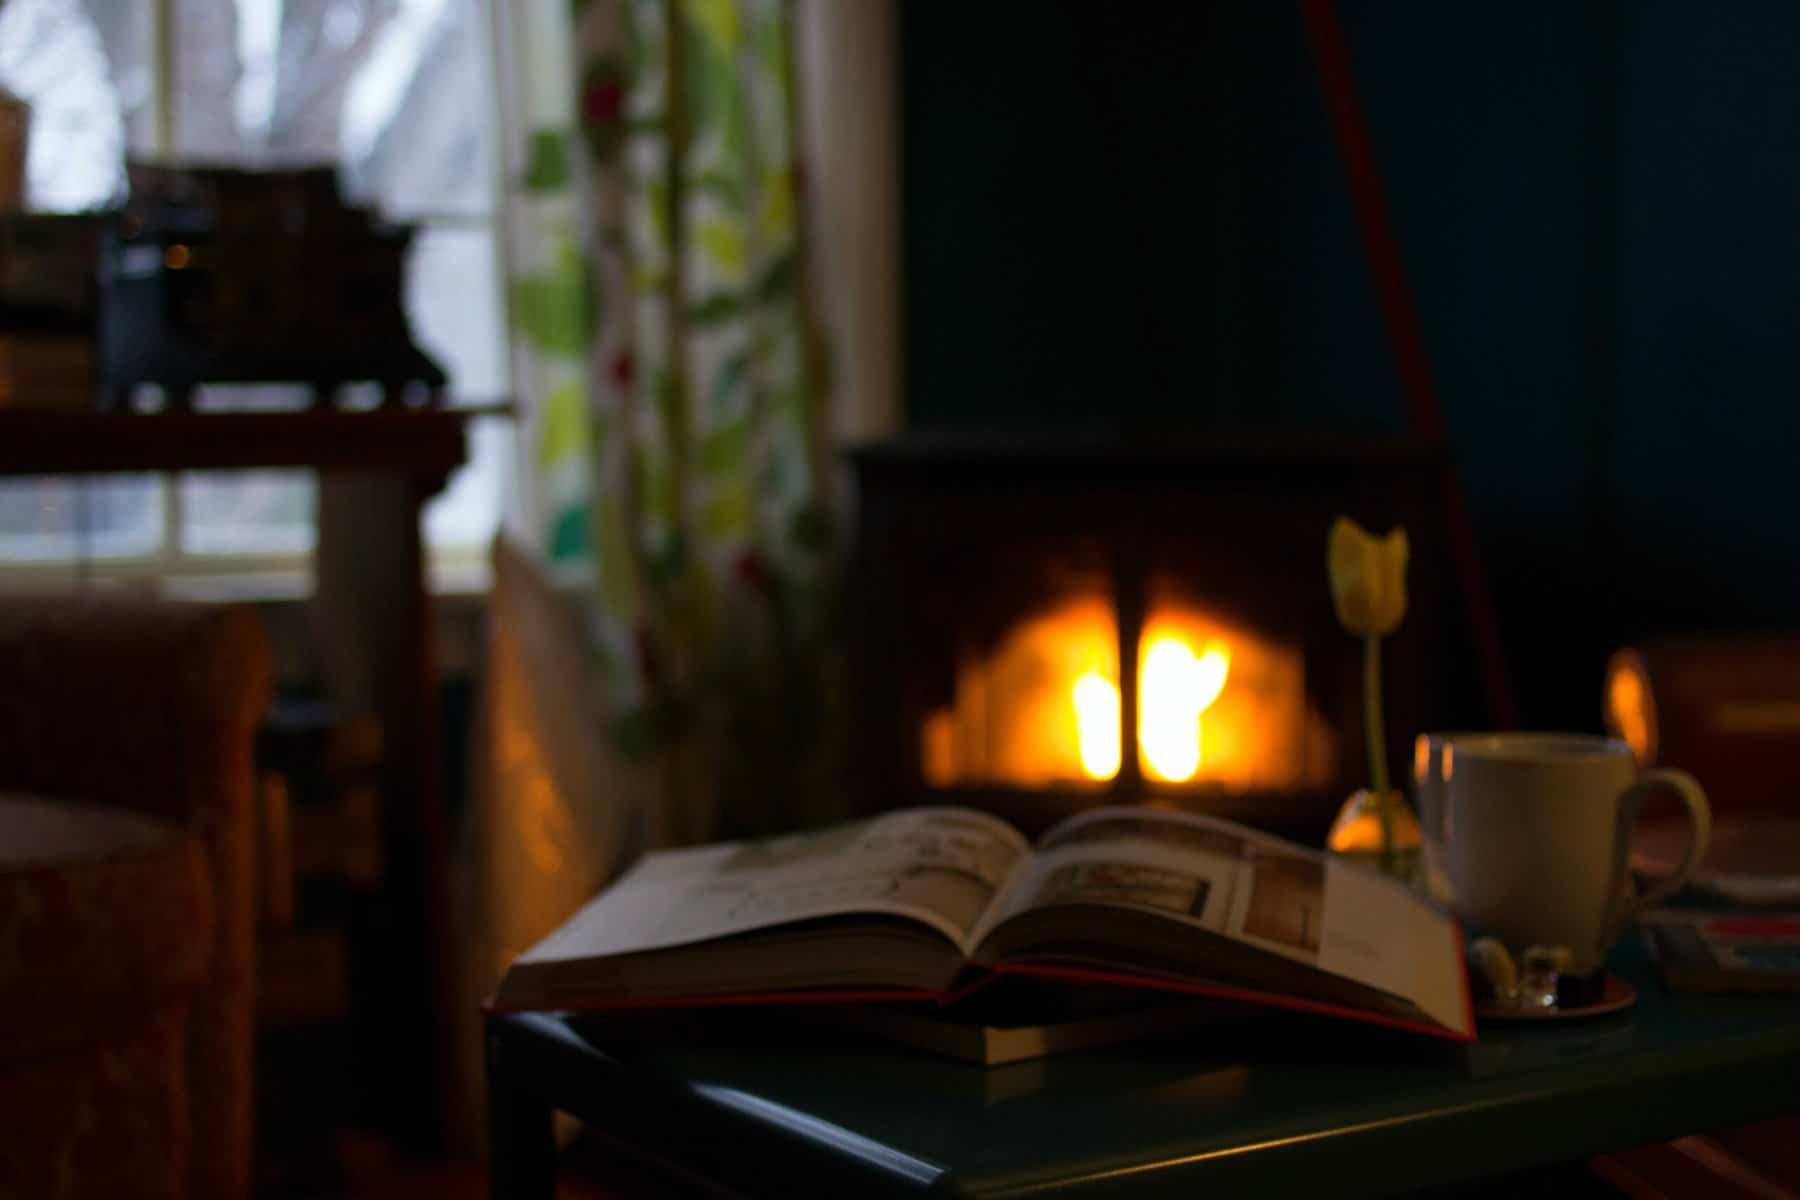 Reading a book by the fireplace in winter